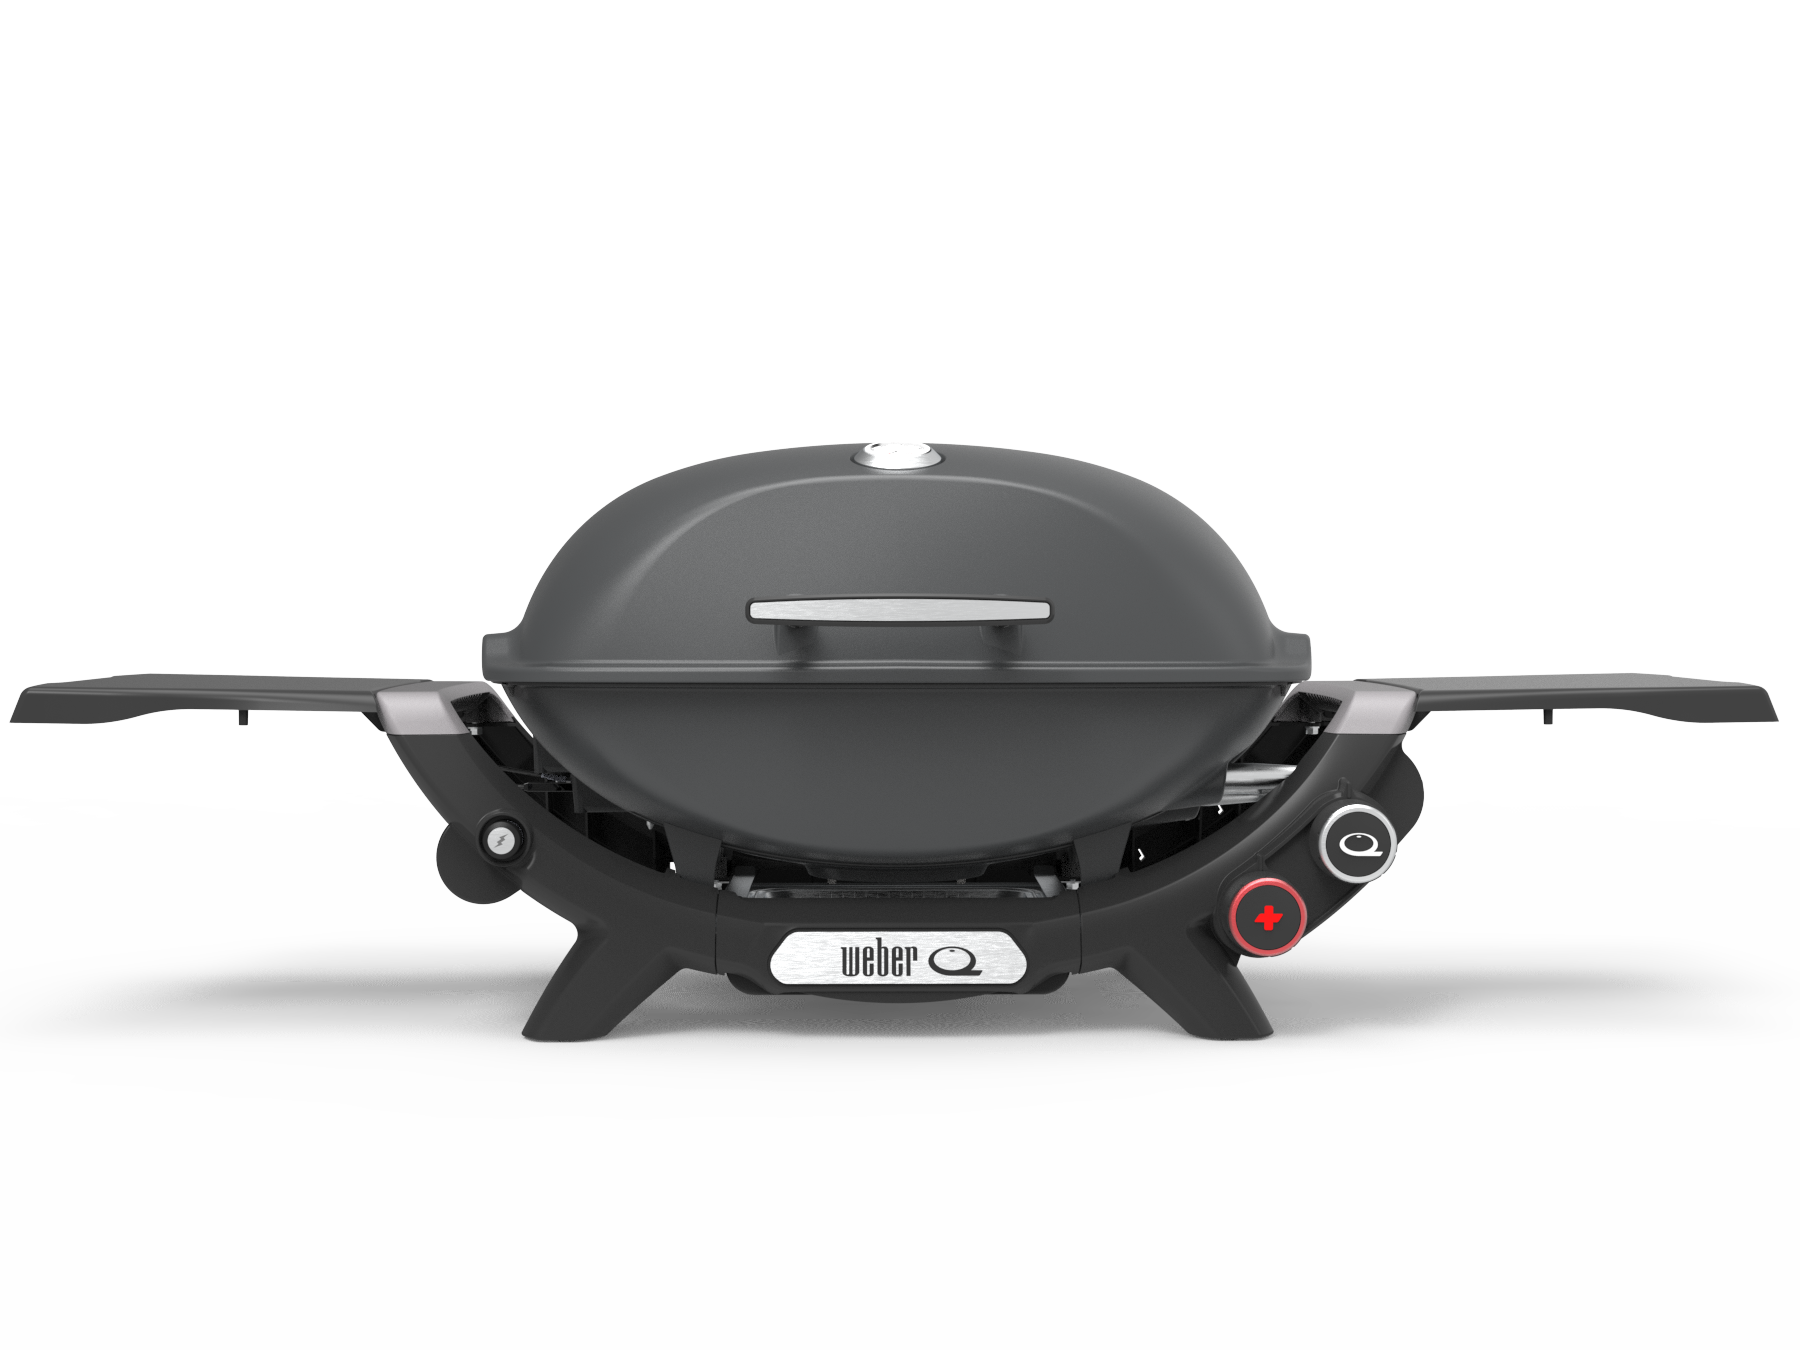 Weber Q 2800 plus front view in charcoal grey colour